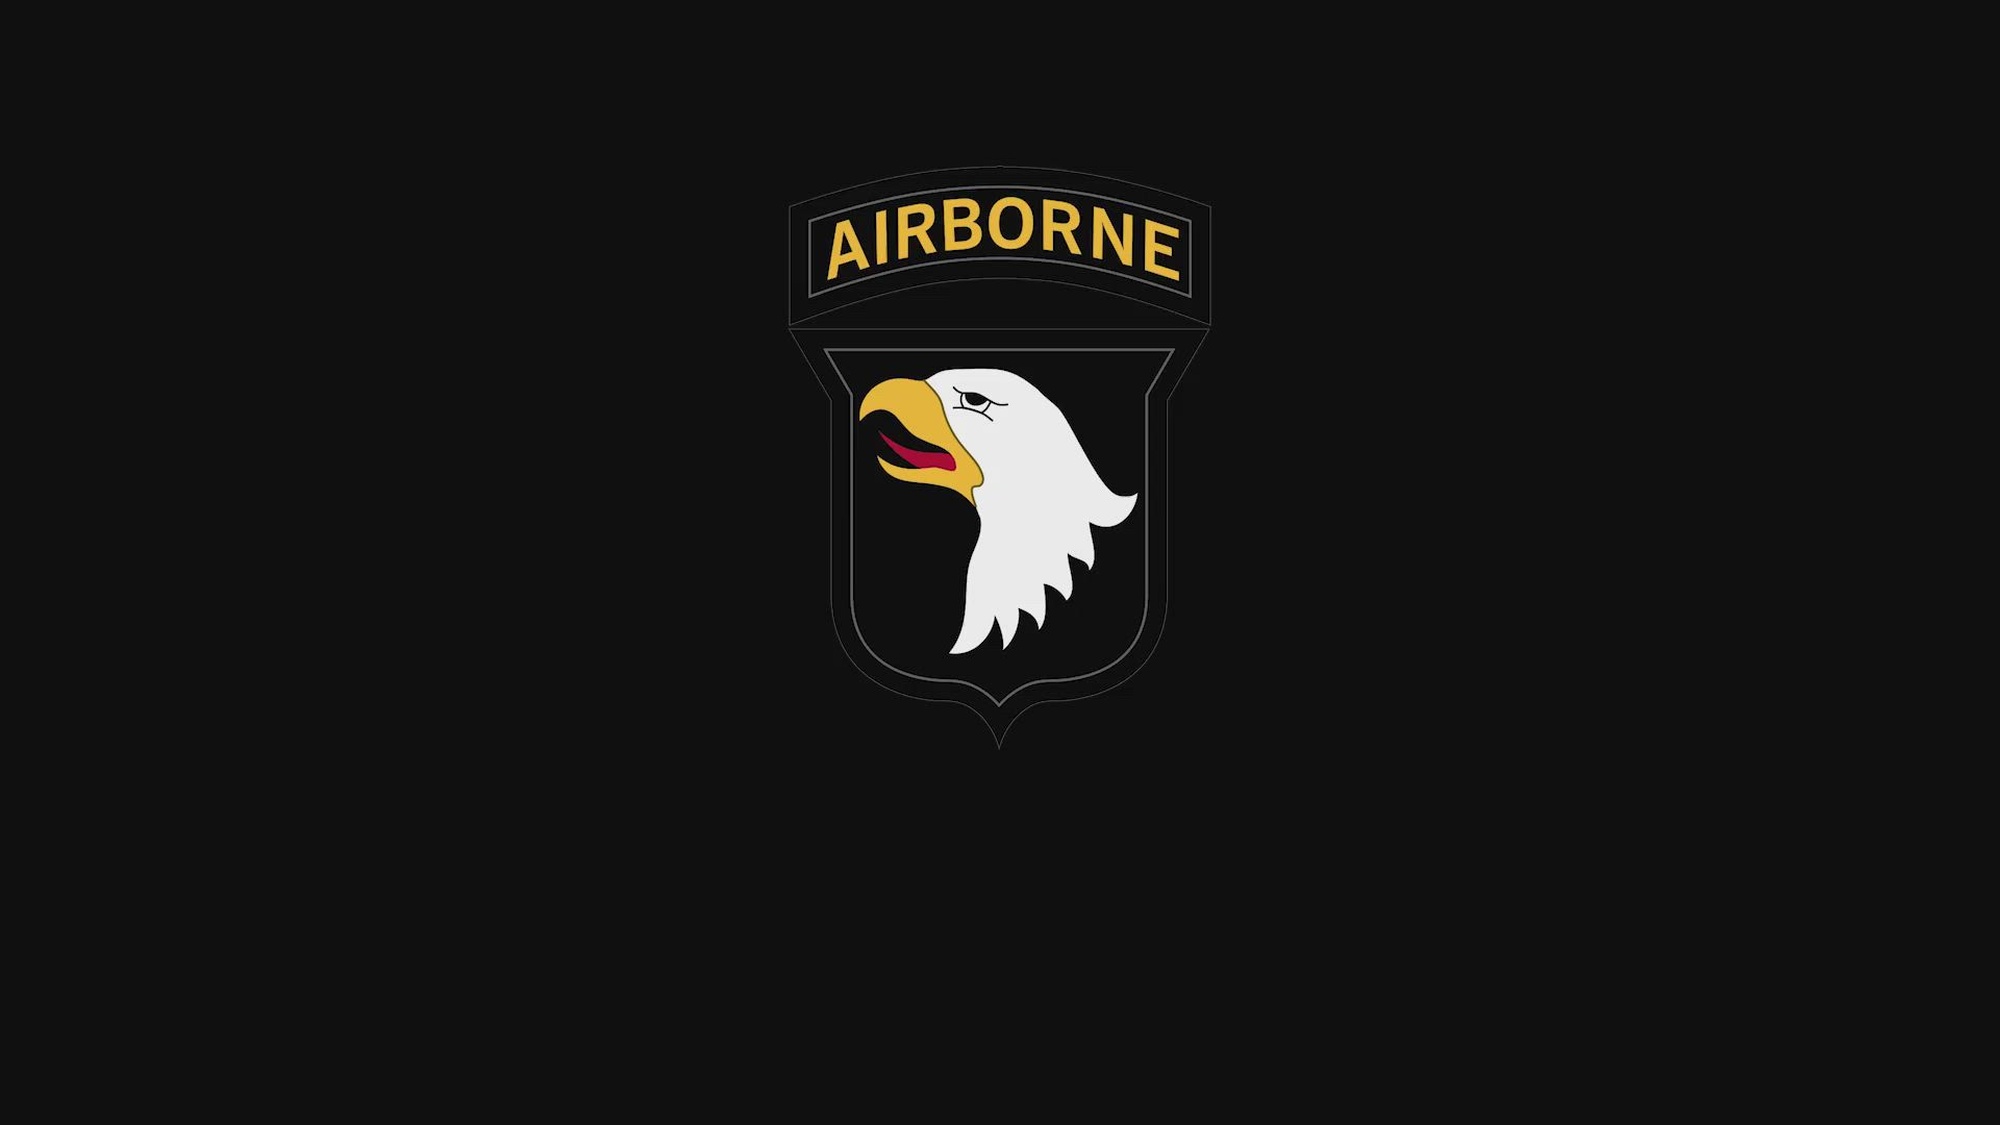 Soldiers of 101st Airborne Division (Air Assault) Headquarters, deployed to Europe, June 26-28, 2022. The division deployed in order to support V Corps's mission to NATO: reassure our allies and partners, and deter aggression along the eastern flank.